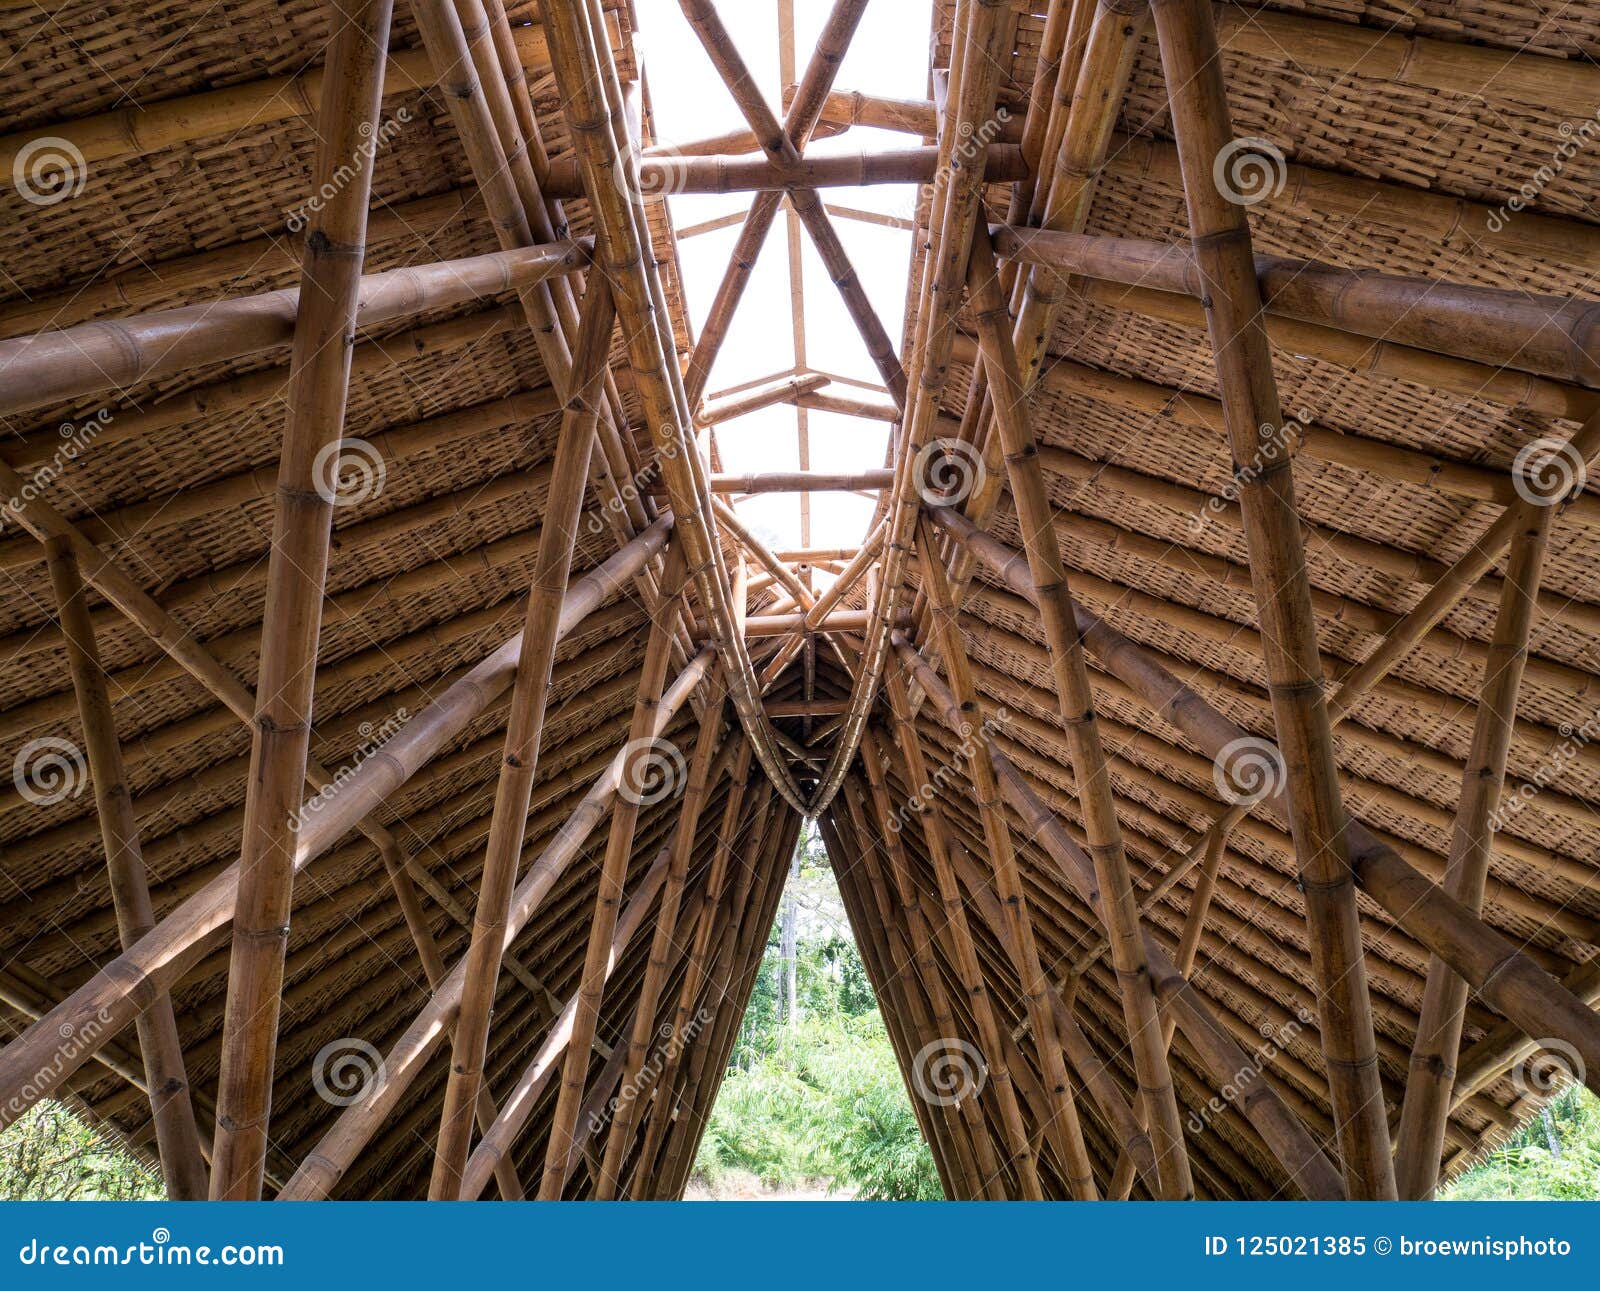  Bamboo Roof Construction  Roof  Construction  Made From 